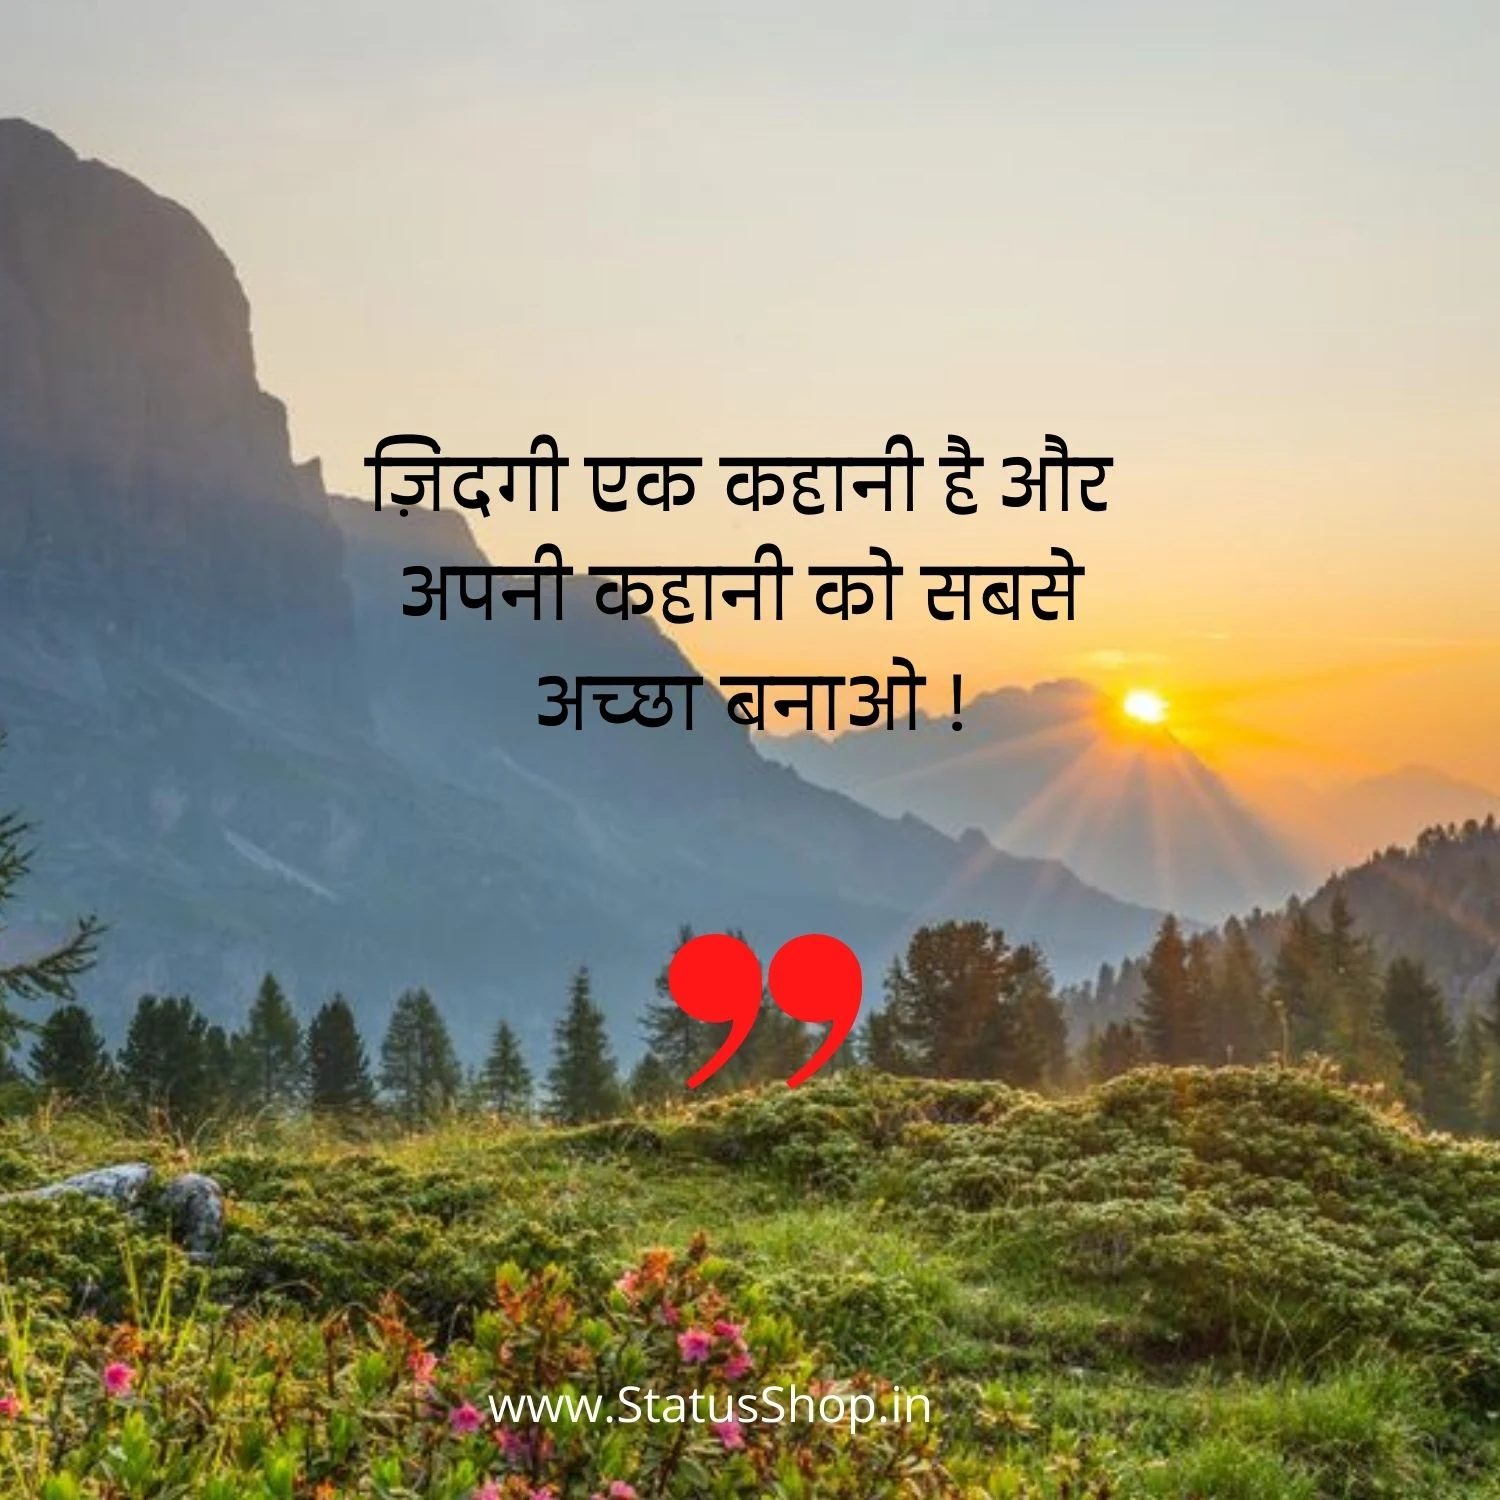 Quotes-In-Hindi-Photo